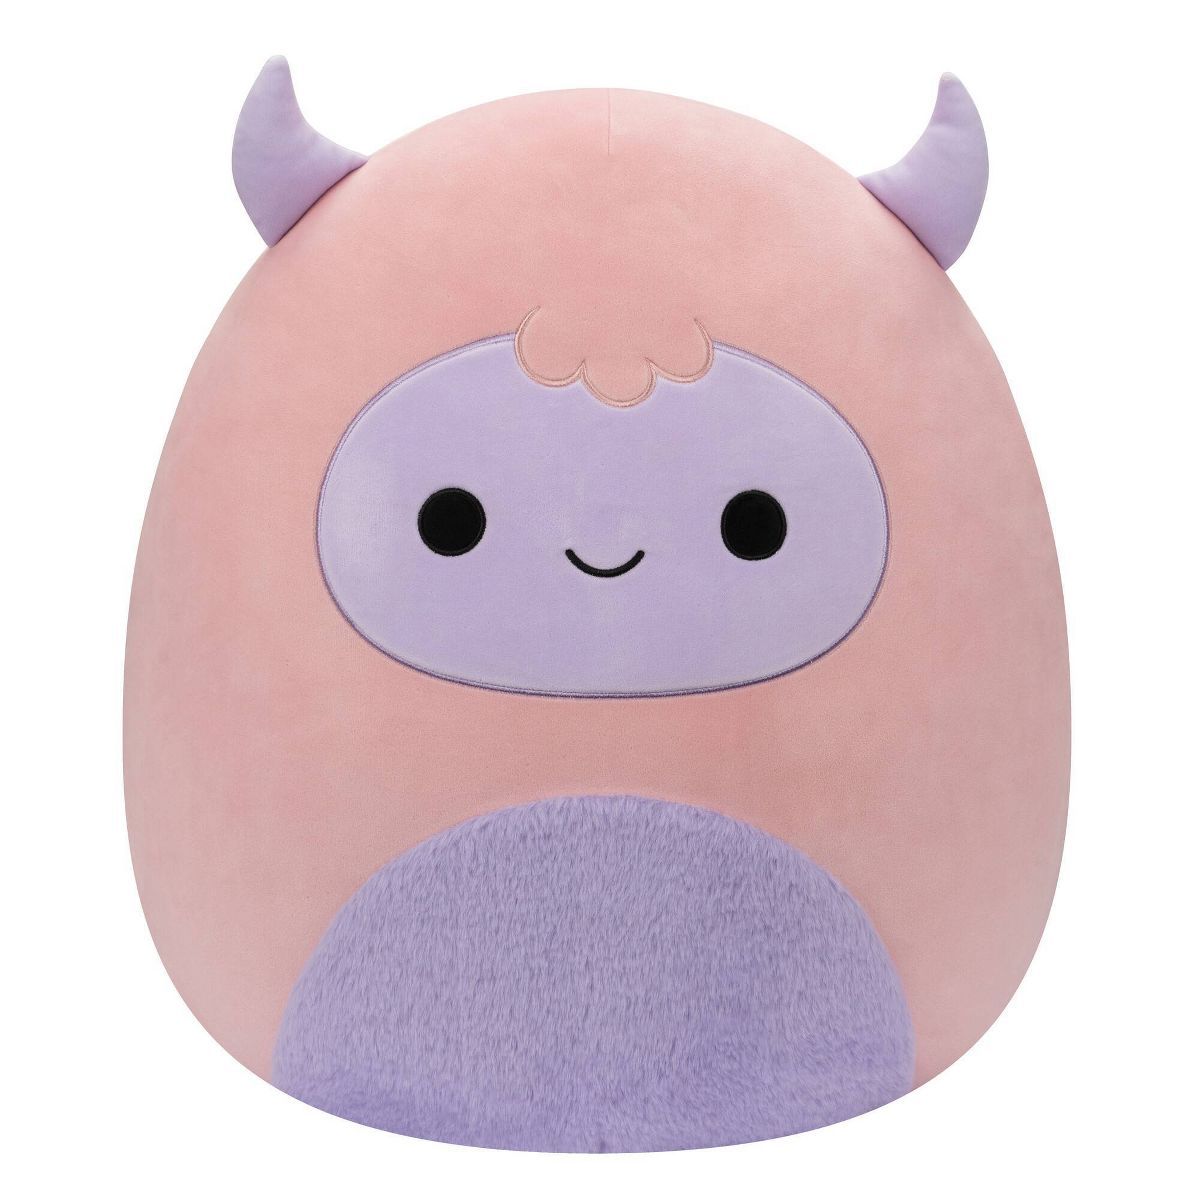 Squishmallows 11" Ronalda the Pink and Purple Yeti Plush Toy (Target Exclusive) | Target